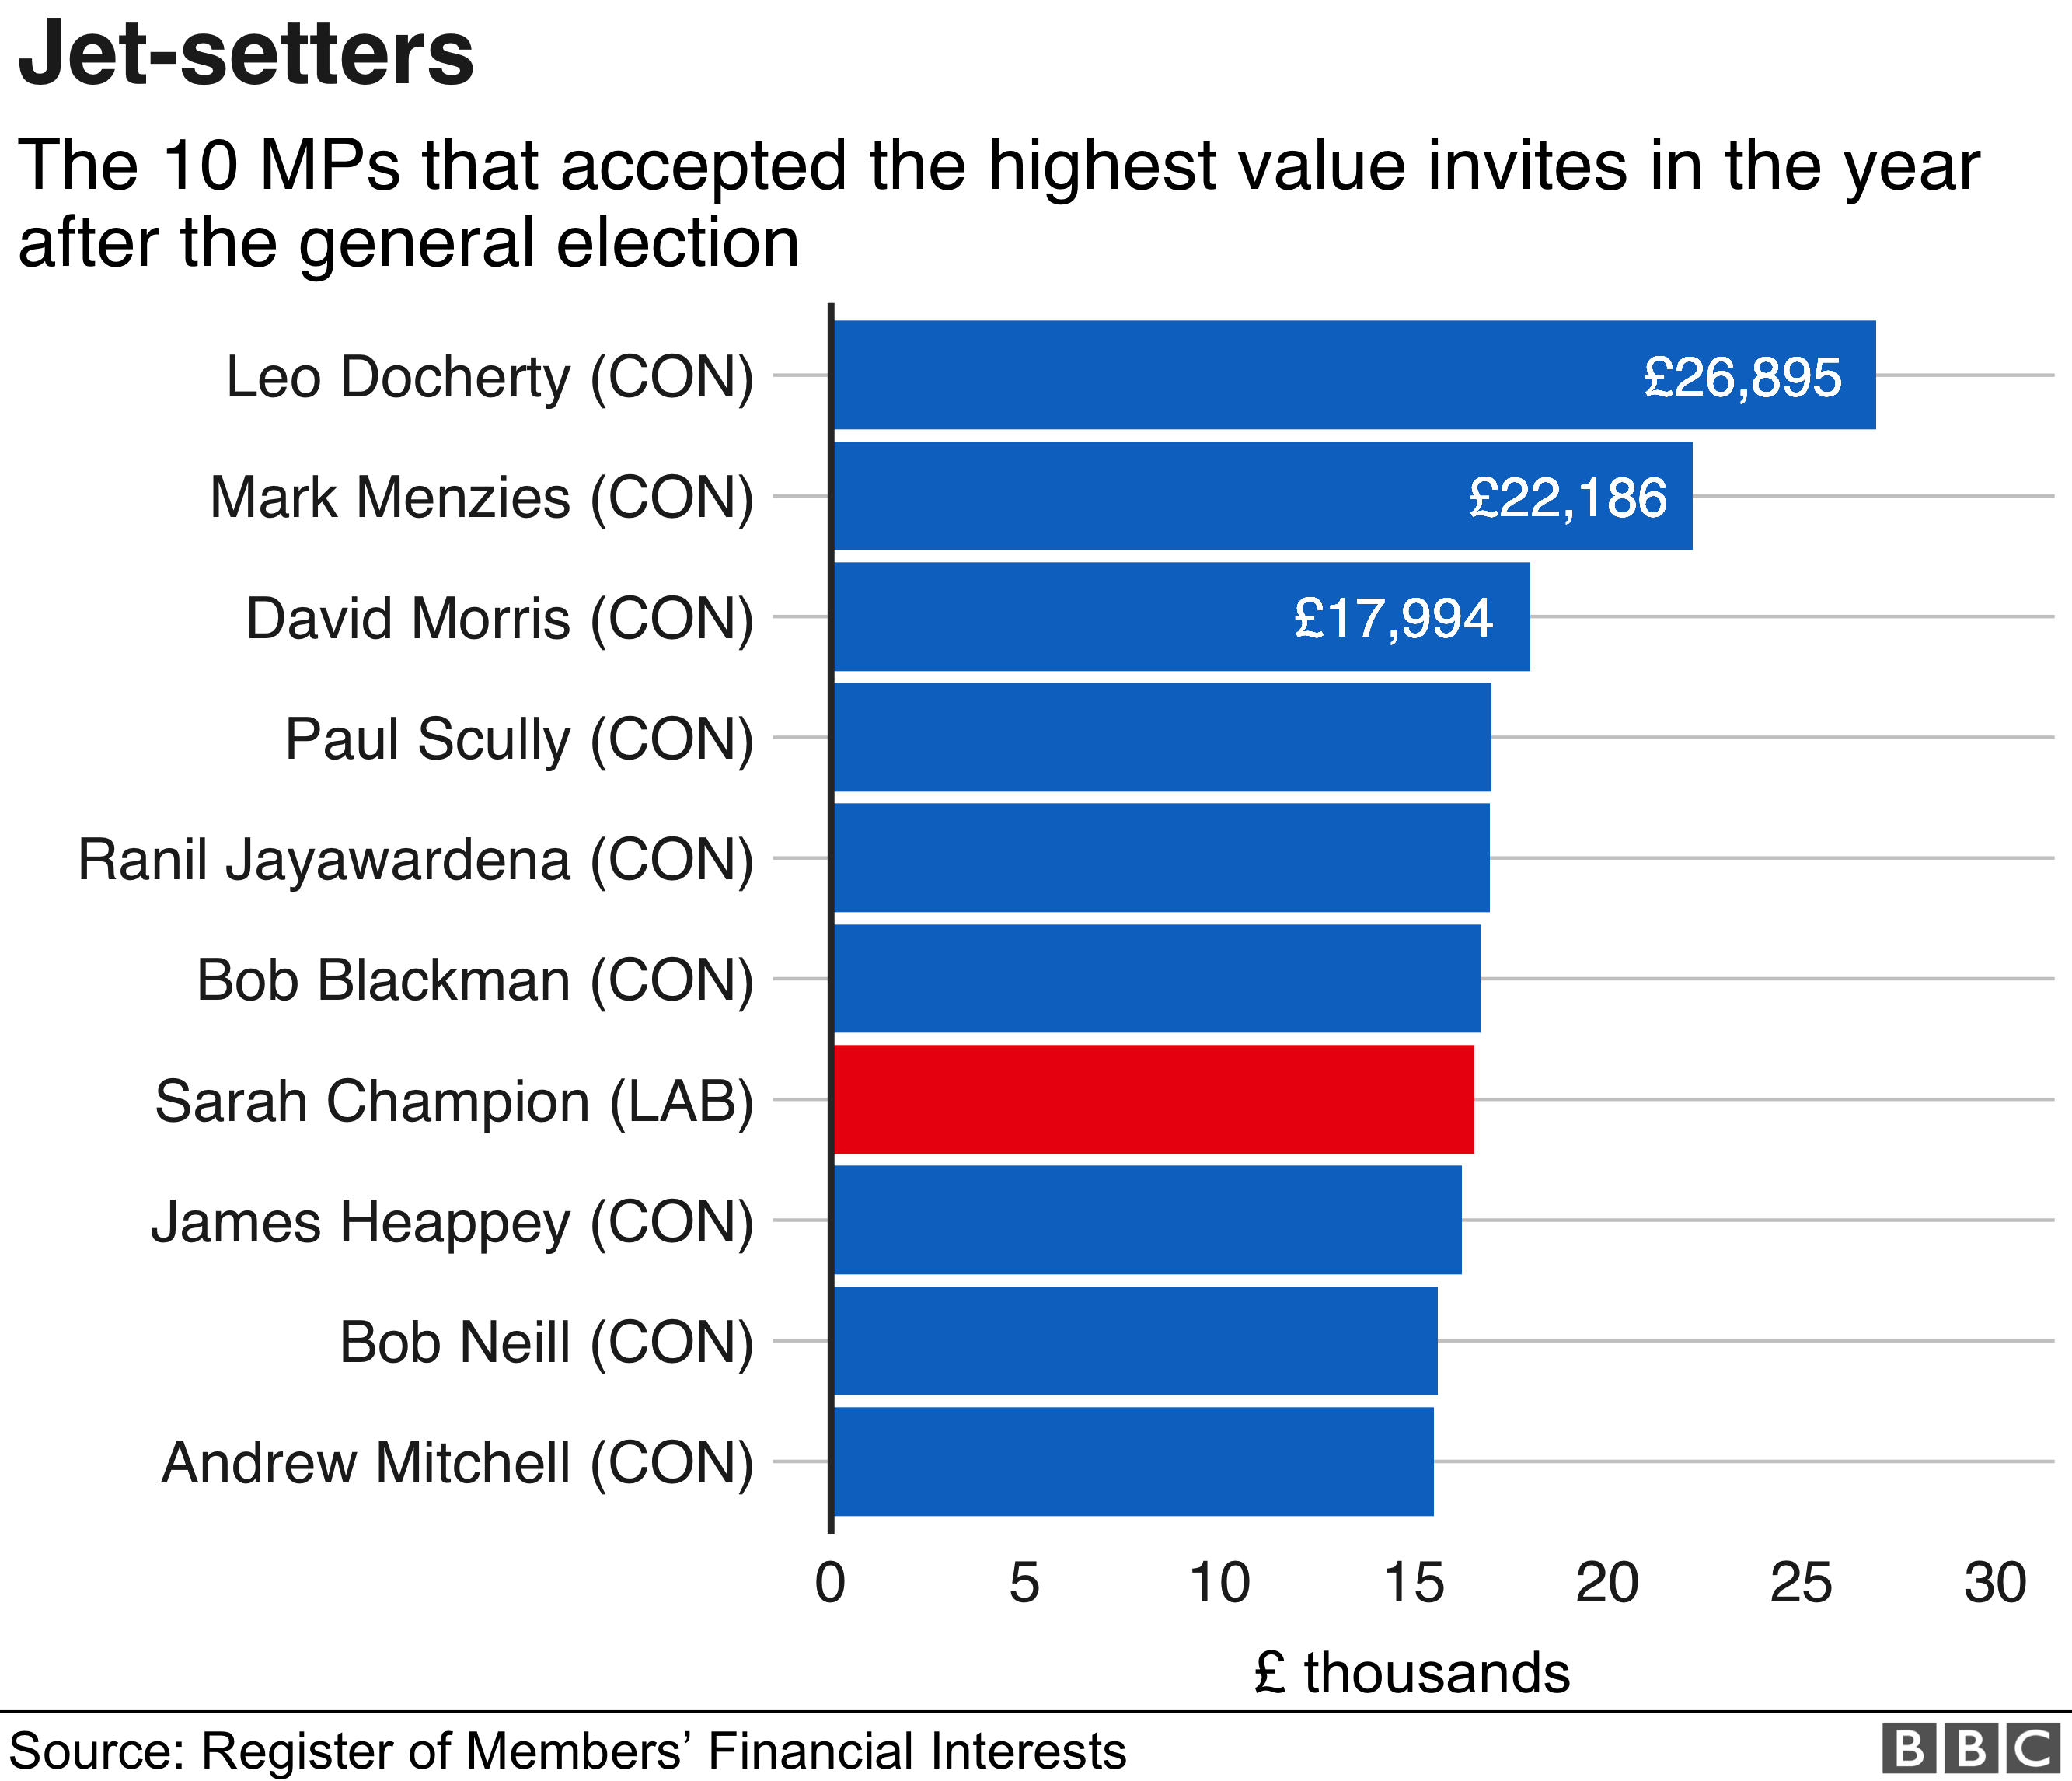 Nine of the ten MPs who accepted the highest value of trips were Conservatives. Leo Doherty was the highest at £26,895